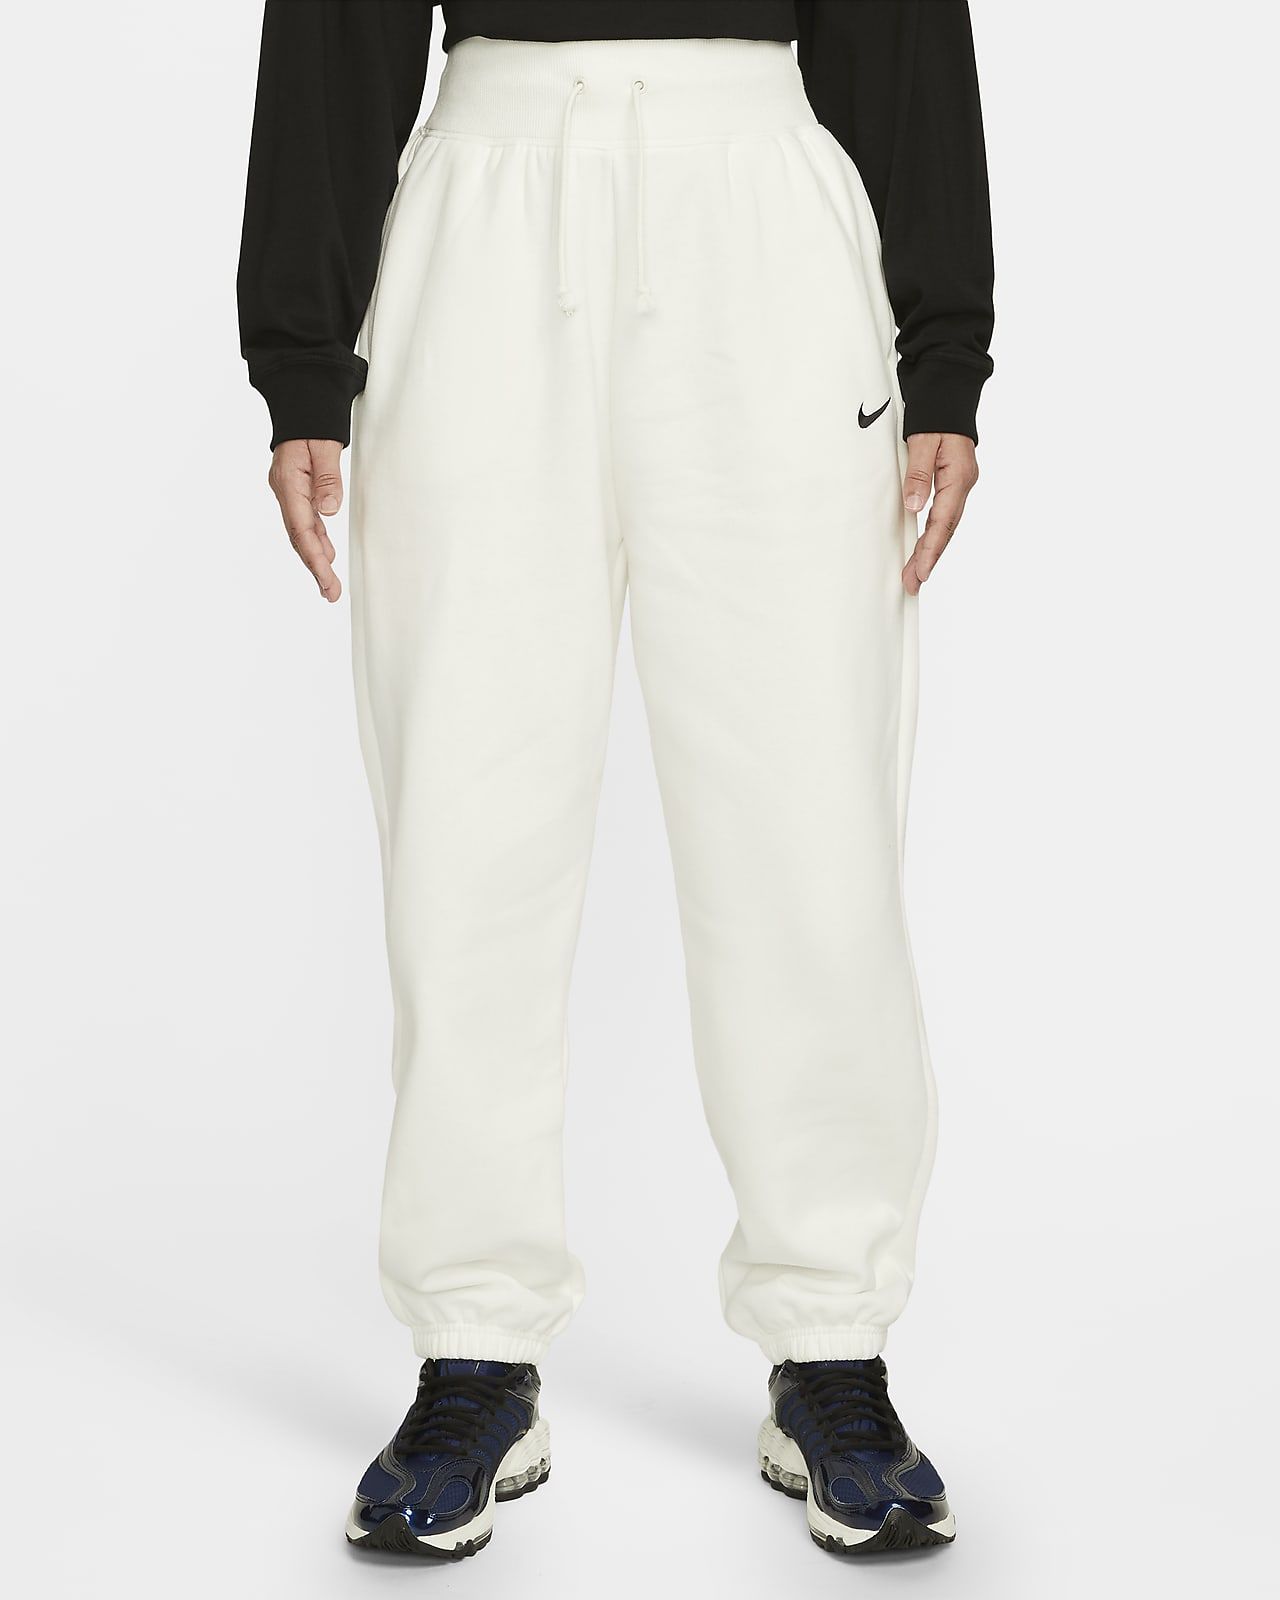 Women's High-Waisted Oversized Tracksuit Bottoms | Nike (CA)